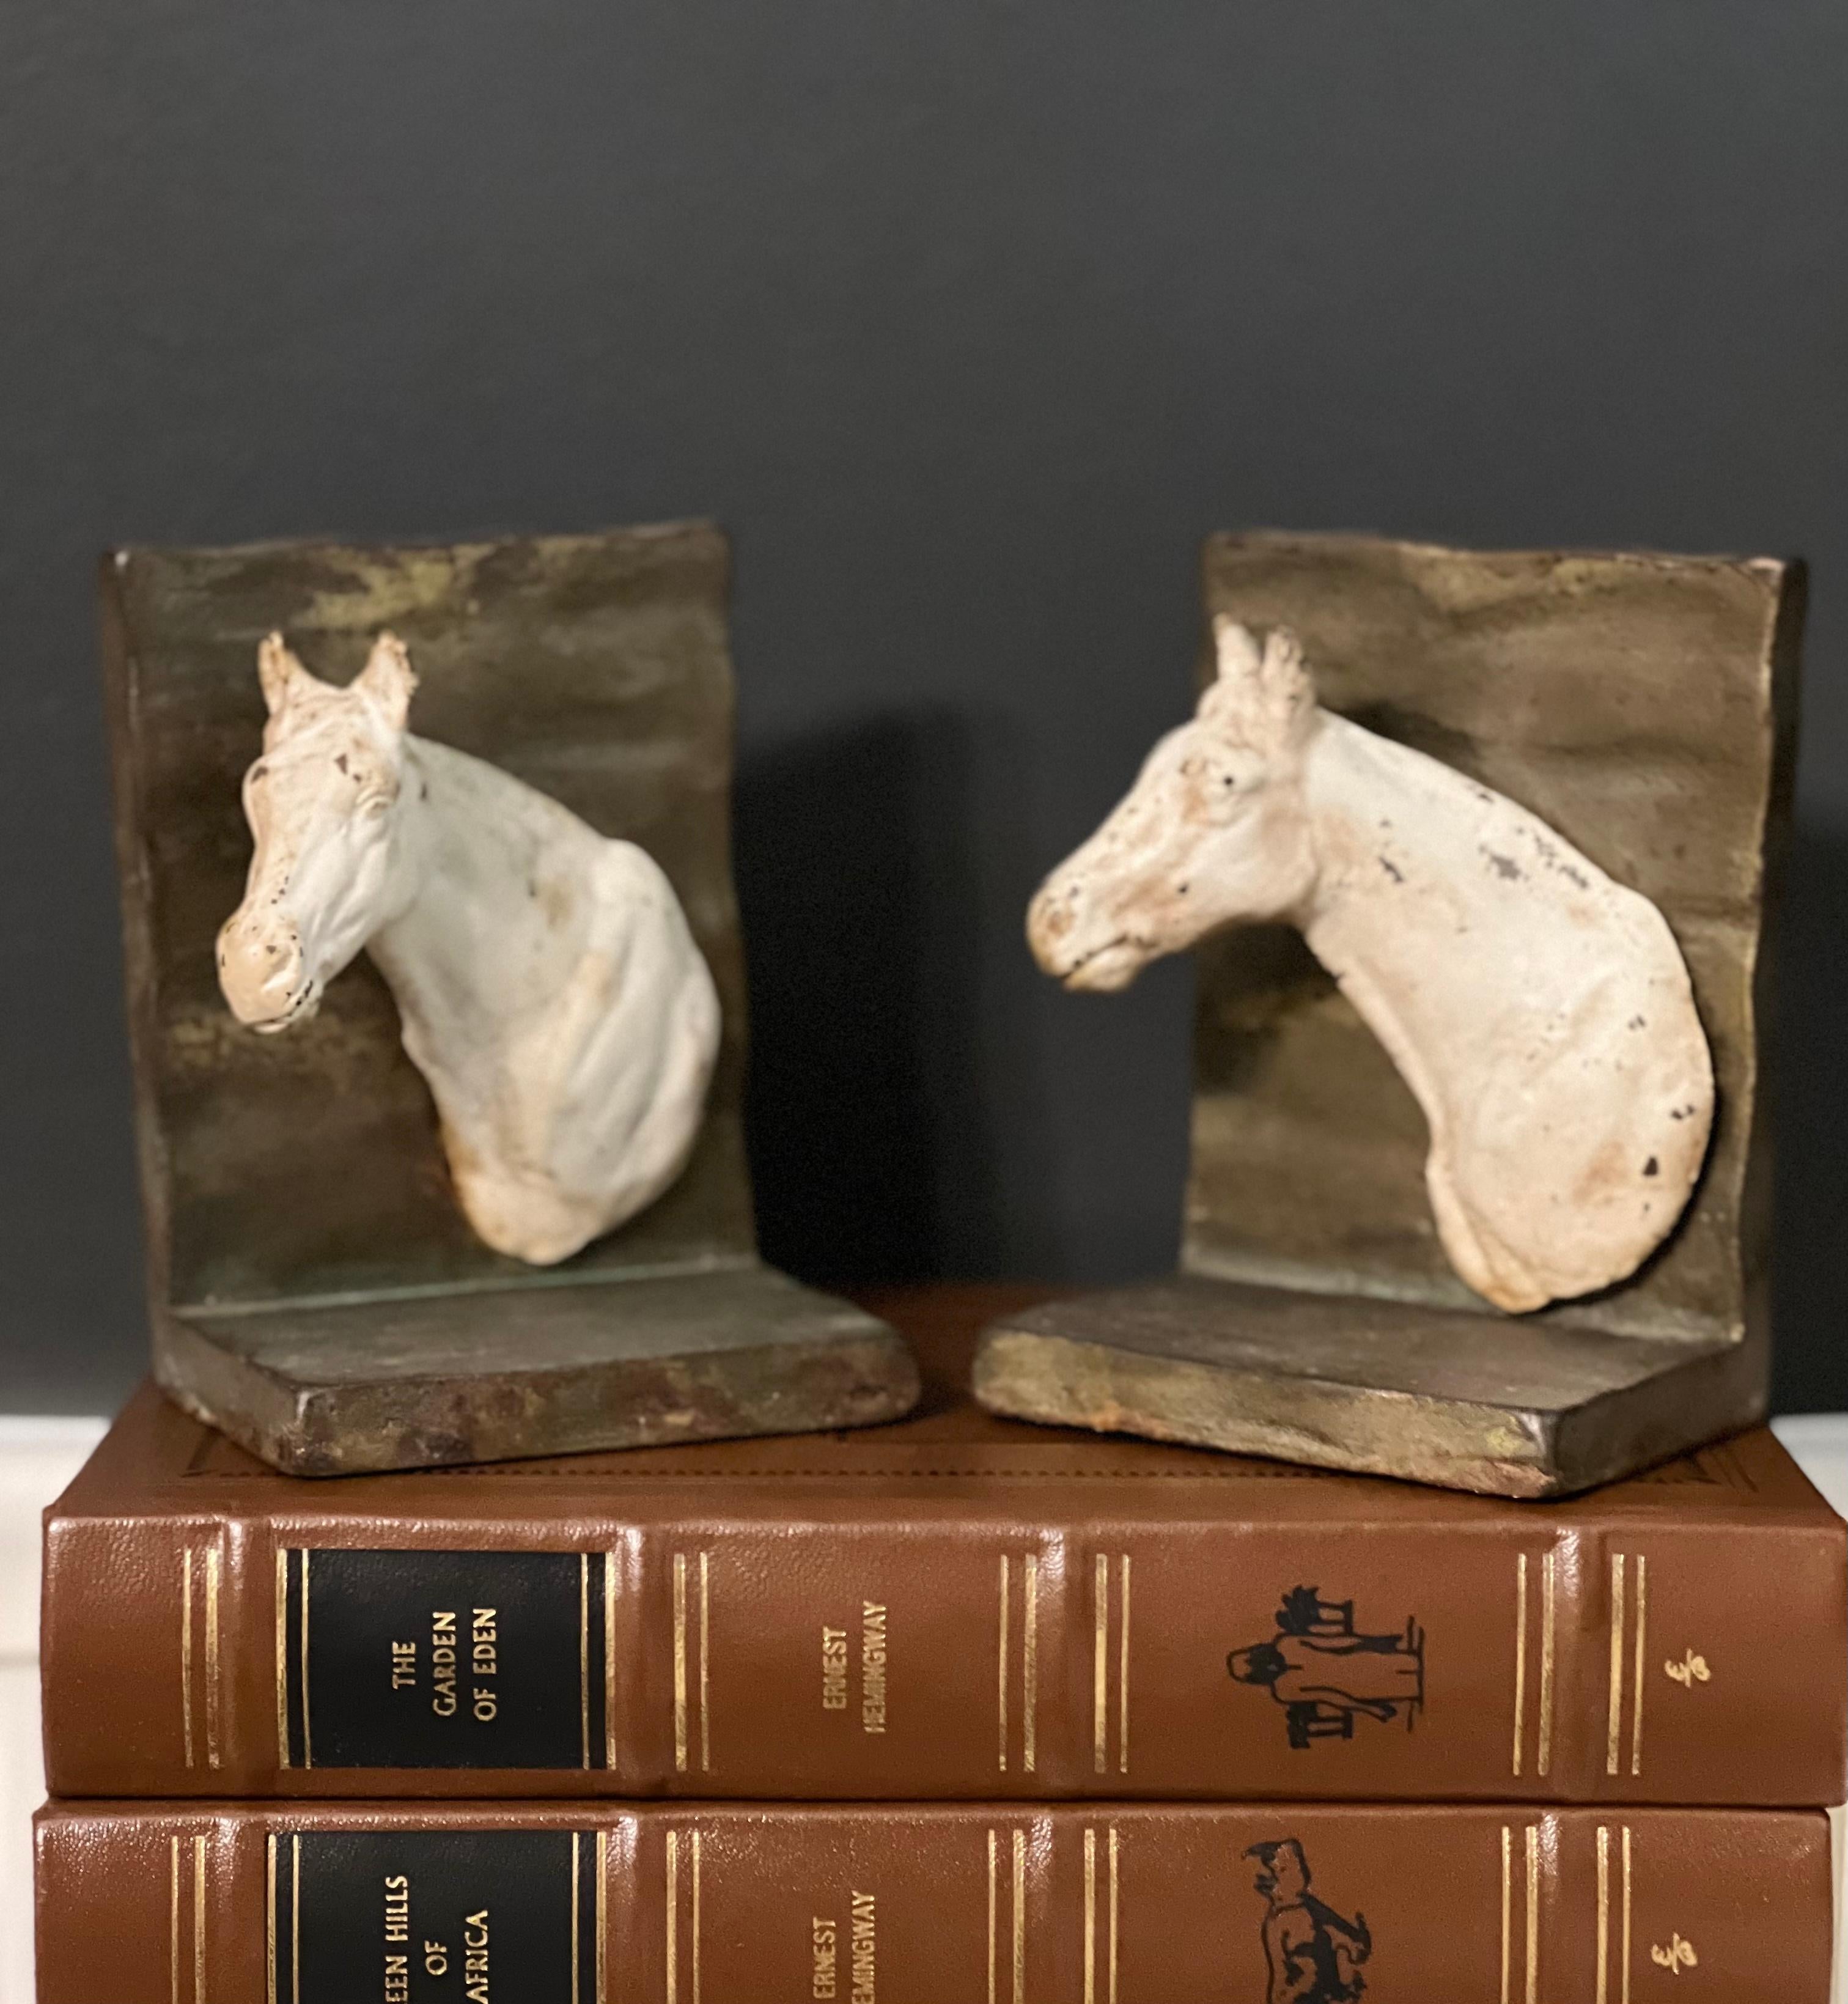 Charming vintage cast iron horse bookends, 1930's. Painted horse heads extend outward in opposite direction. Great for a touch of rustic equestrian flair to your desk, bookcase or almost anywhere.